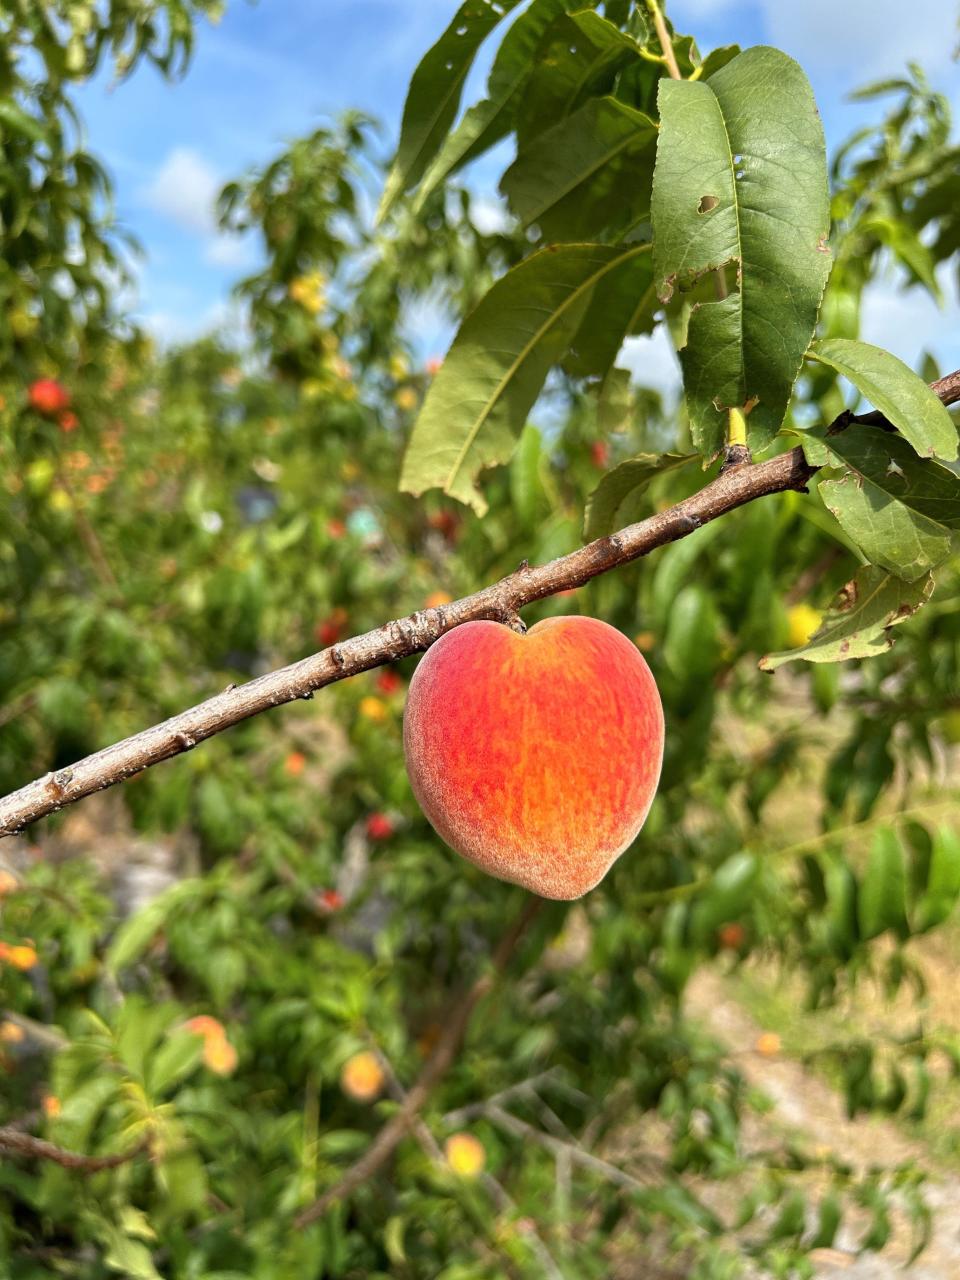 A trip to Deer Park Peaches in Osceola capped a week bursting with close-to-home adventures for Suzy Leonard, her husband and two friends.